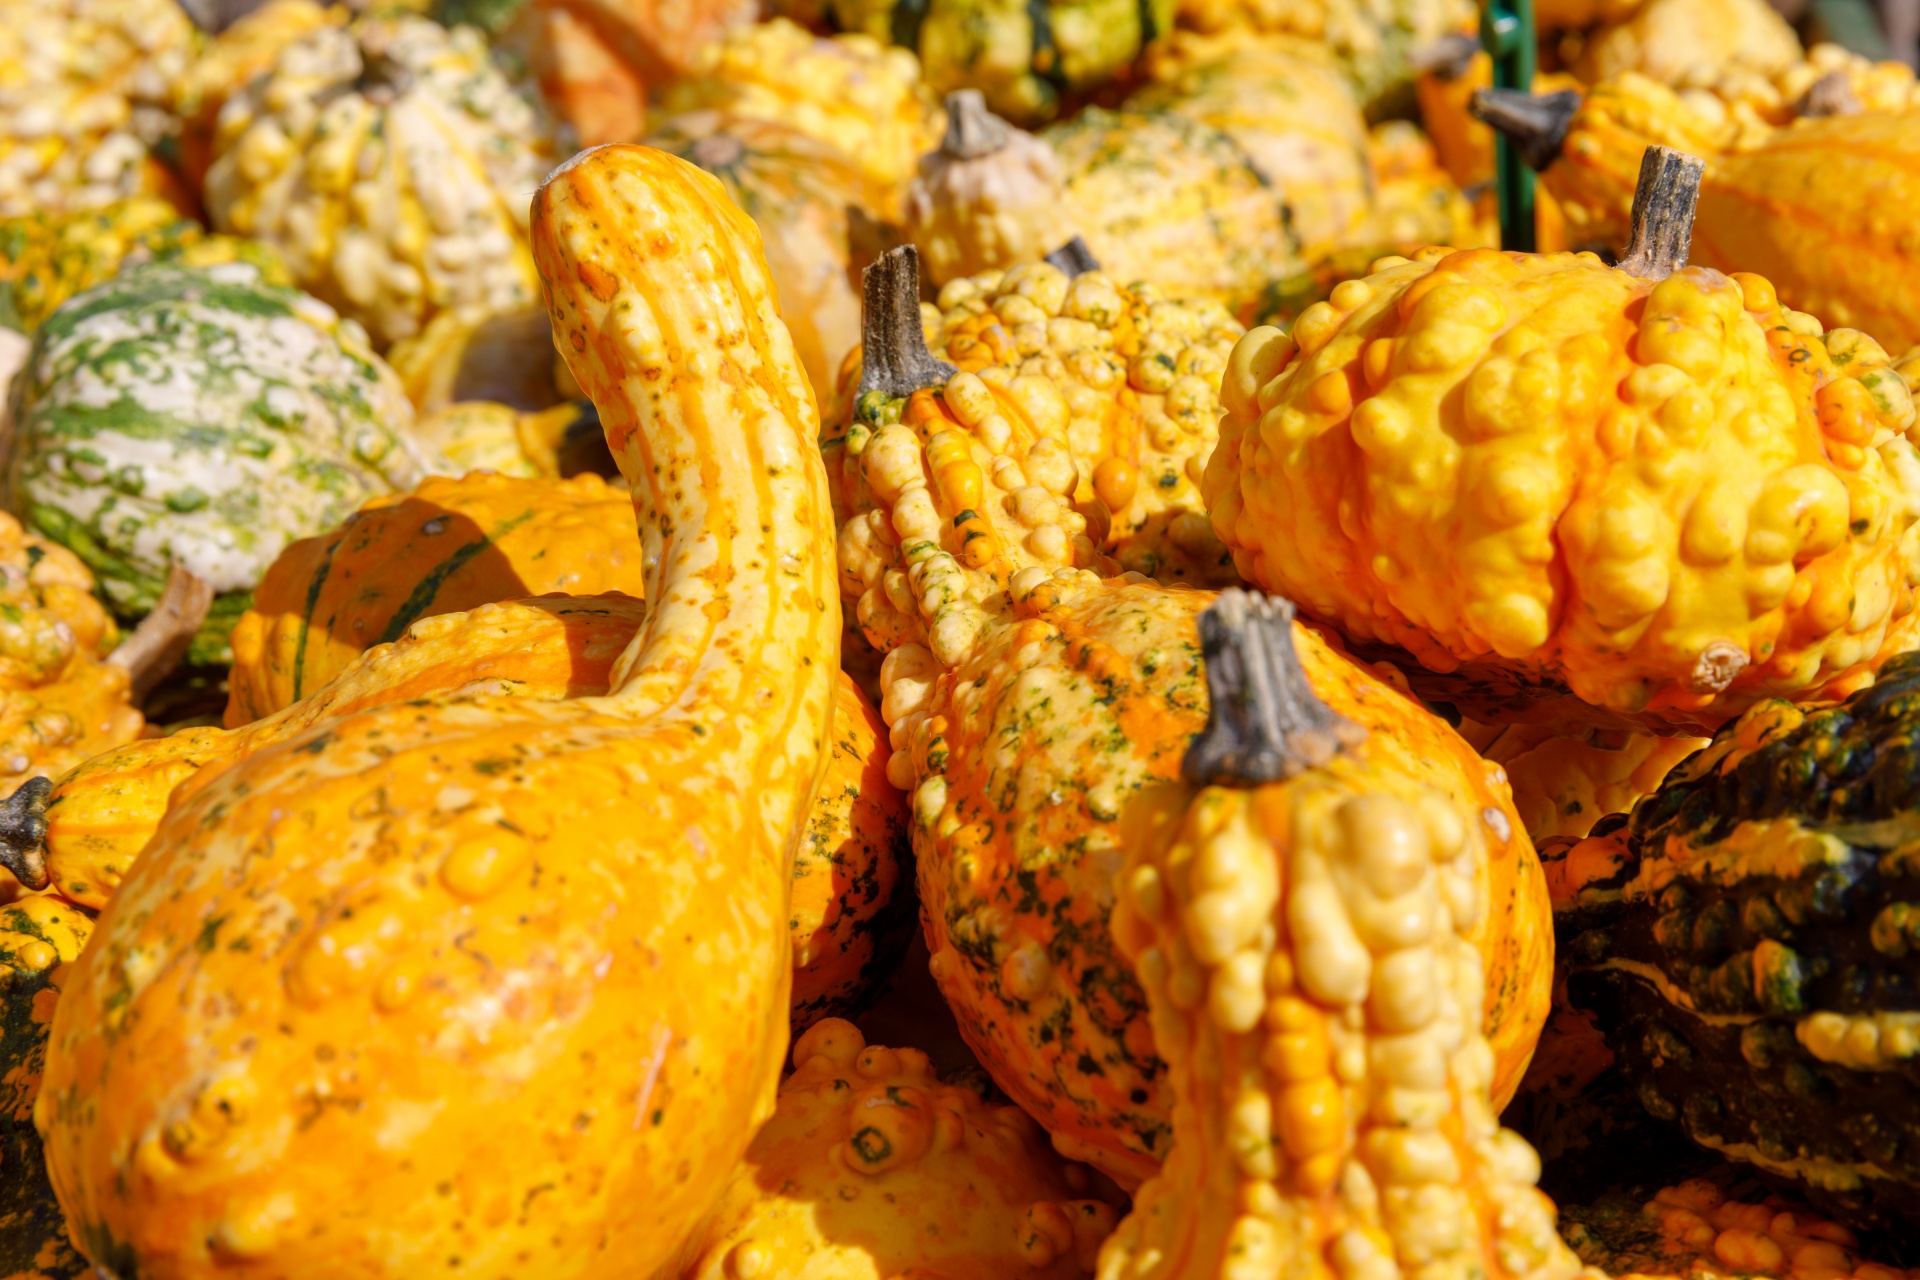 Many Gourds